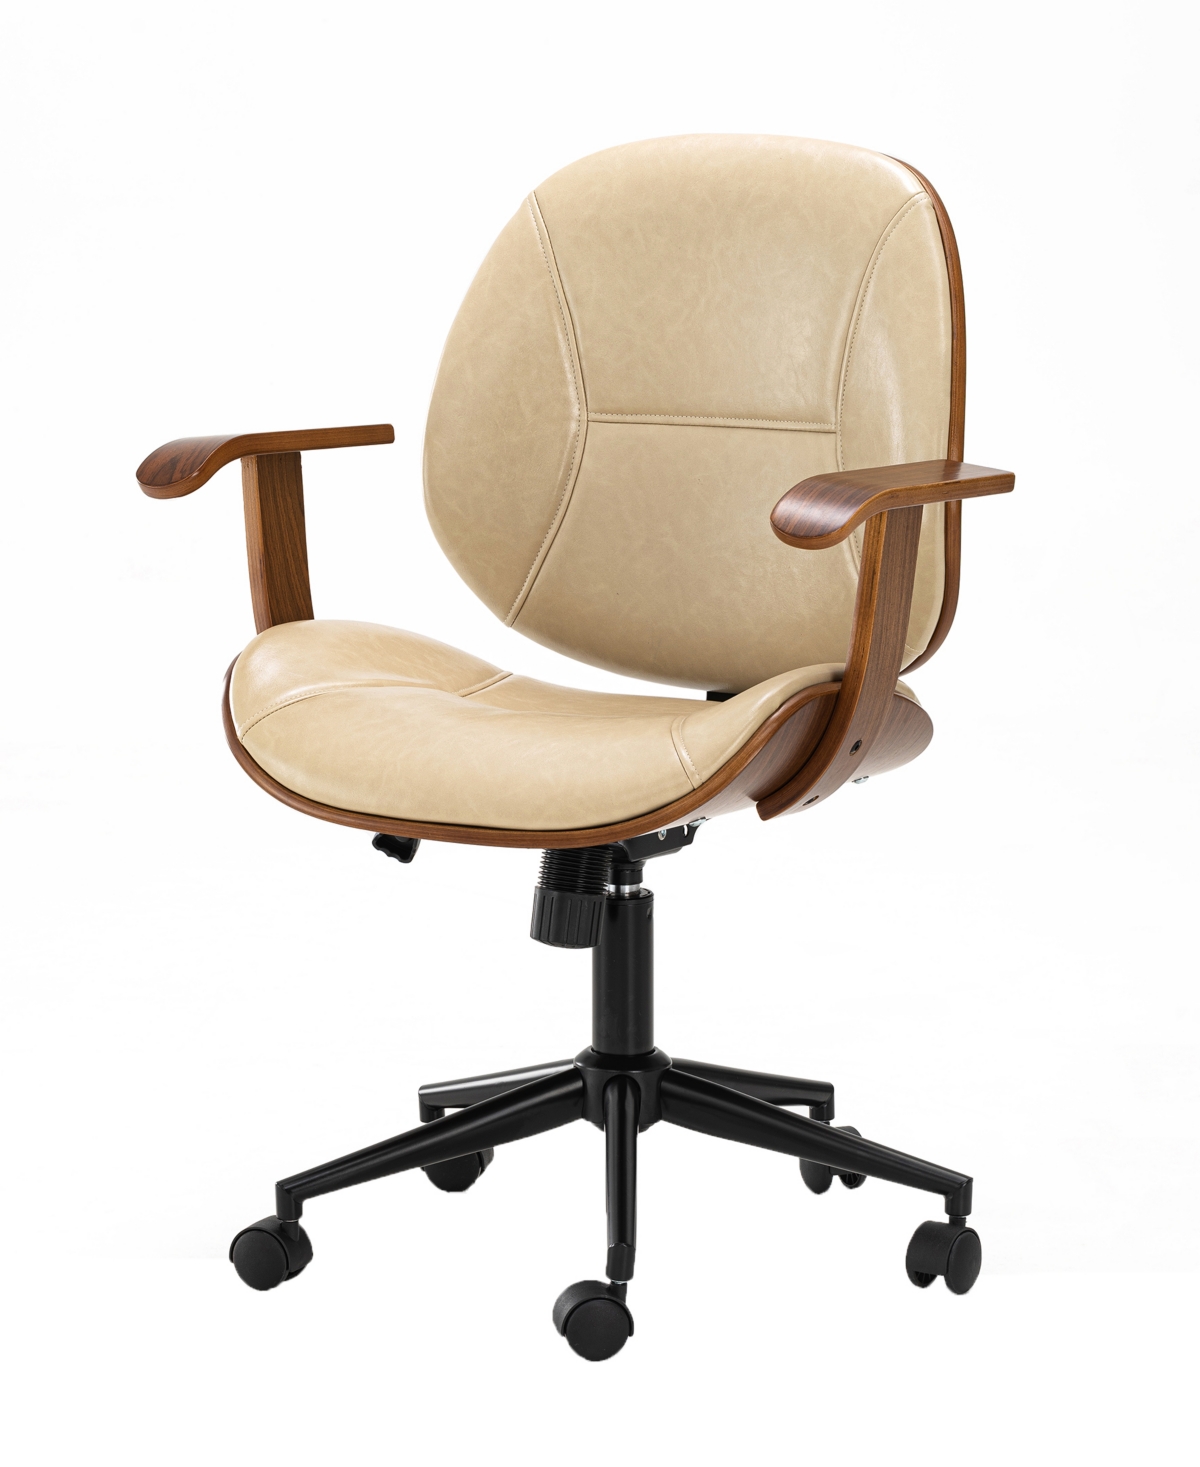 Glitzhome Leatherette Gaslift Adjustable Swivel Office Chair In Neutral